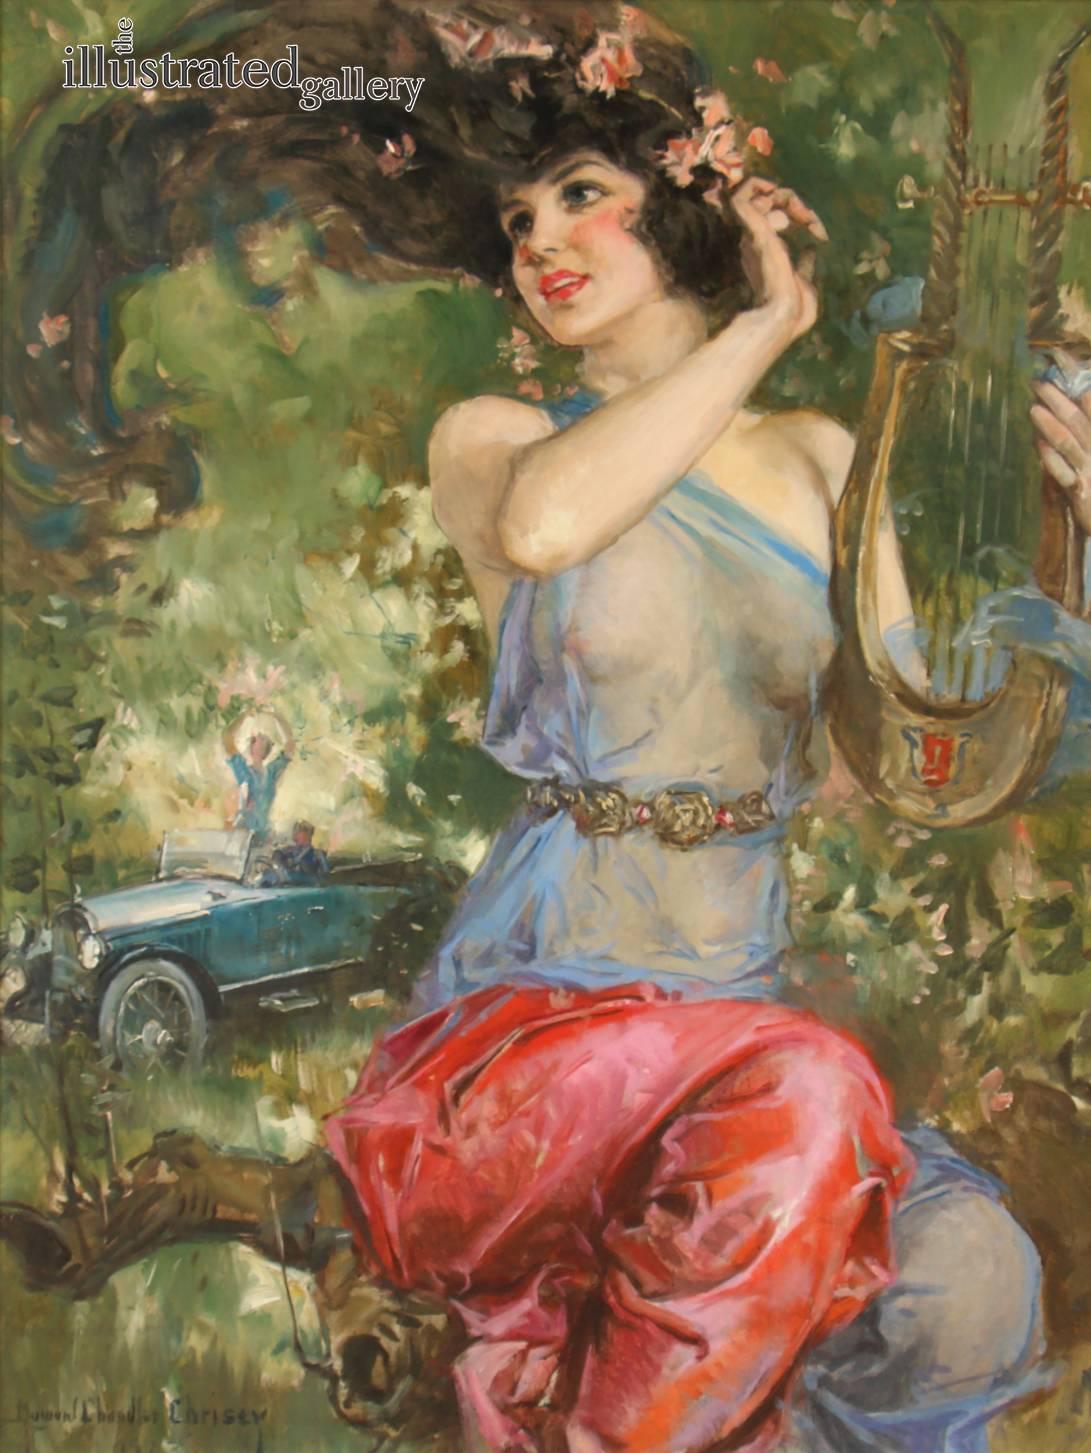 Motor Magazine Cover - Painting by Howard Chandler Christy